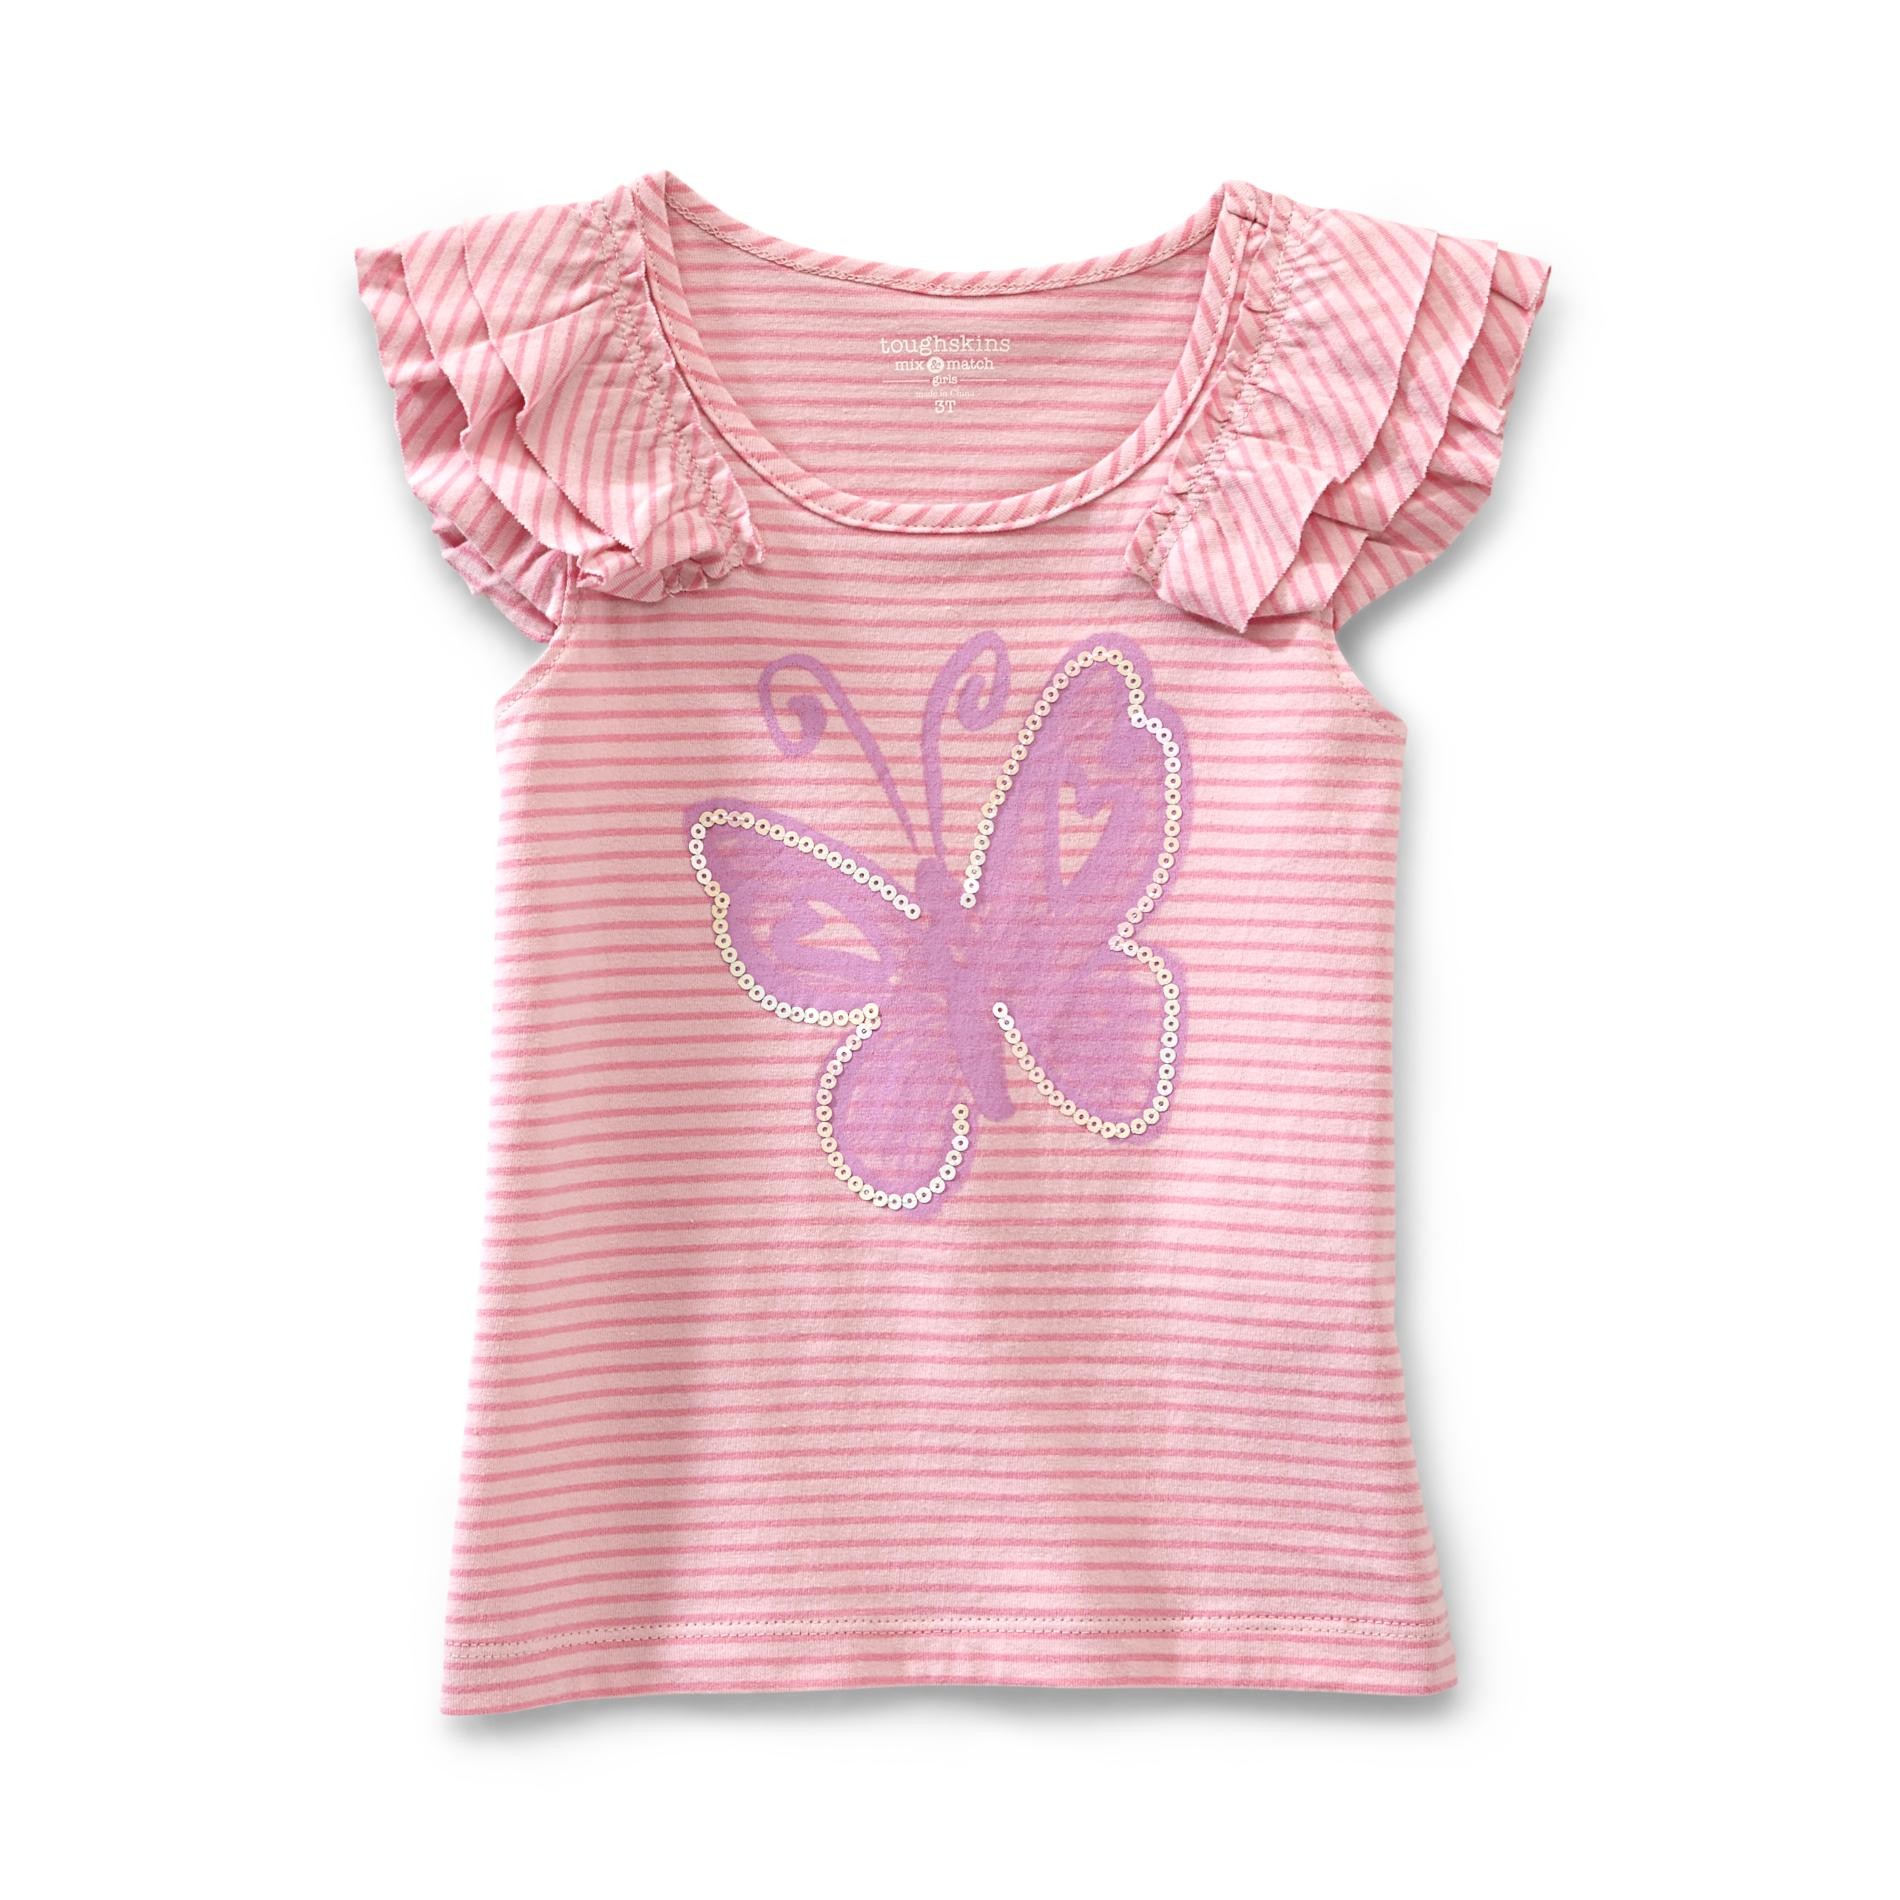 Toughskins Girl's Cap Sleeve Graphic Top - Butterfly